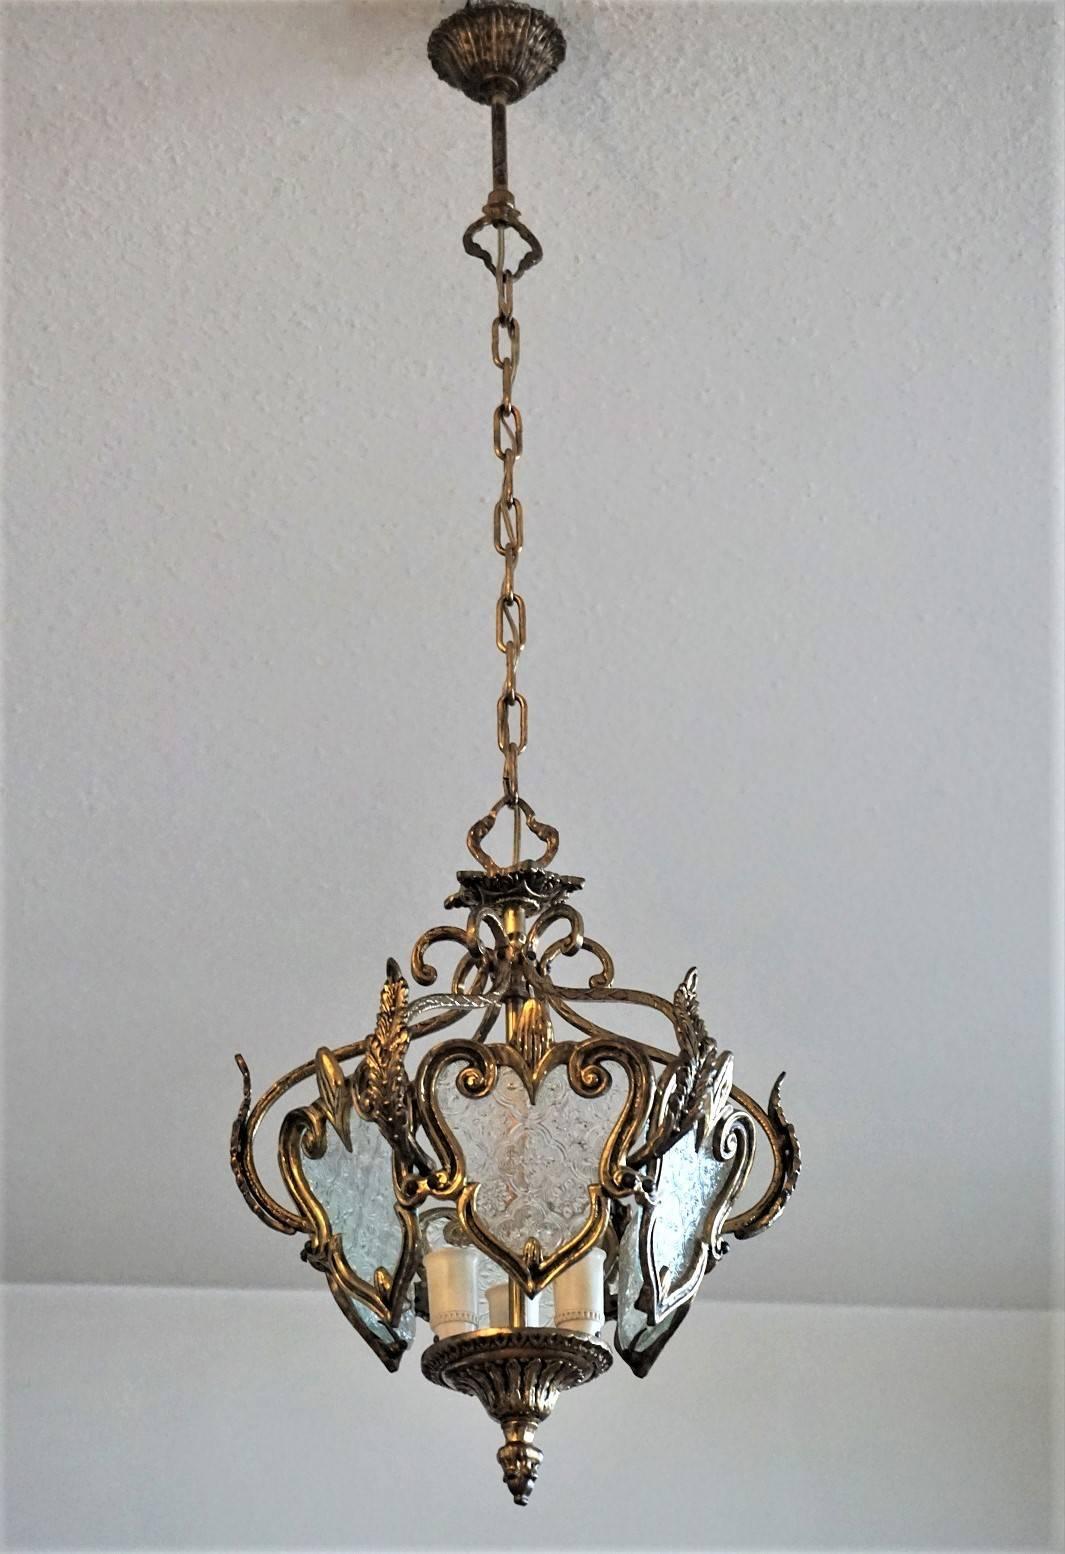 Art Nouveau style bronze three-light lantern richly decorated, six-sided with molded glass windows, circa 1930.
In very good condition, bronze with beautiful patina, on glass no chips or cracks. This piece has been cleaned and hand polished.
Three